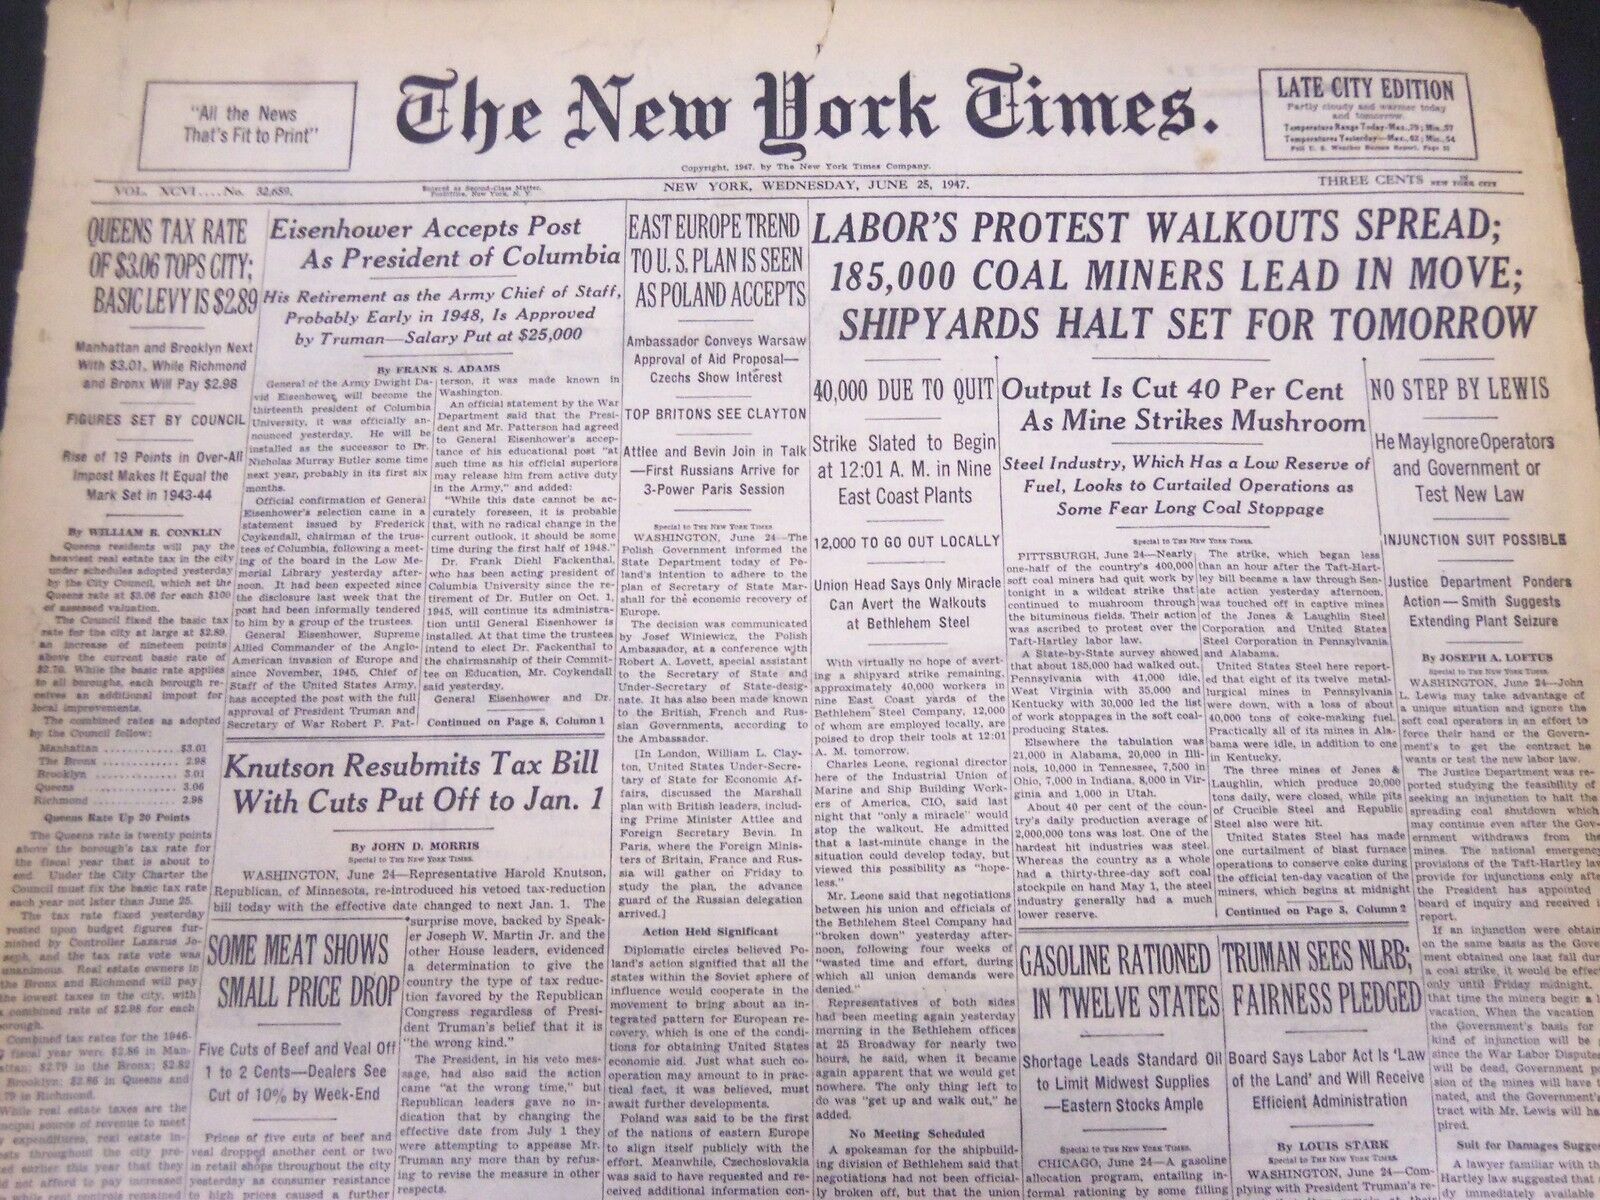 1947 JUNE 25 NY TIMES - EISENHOWER ACCEPTS POST PRESIDENT OF COLUMBIA - NT 5135